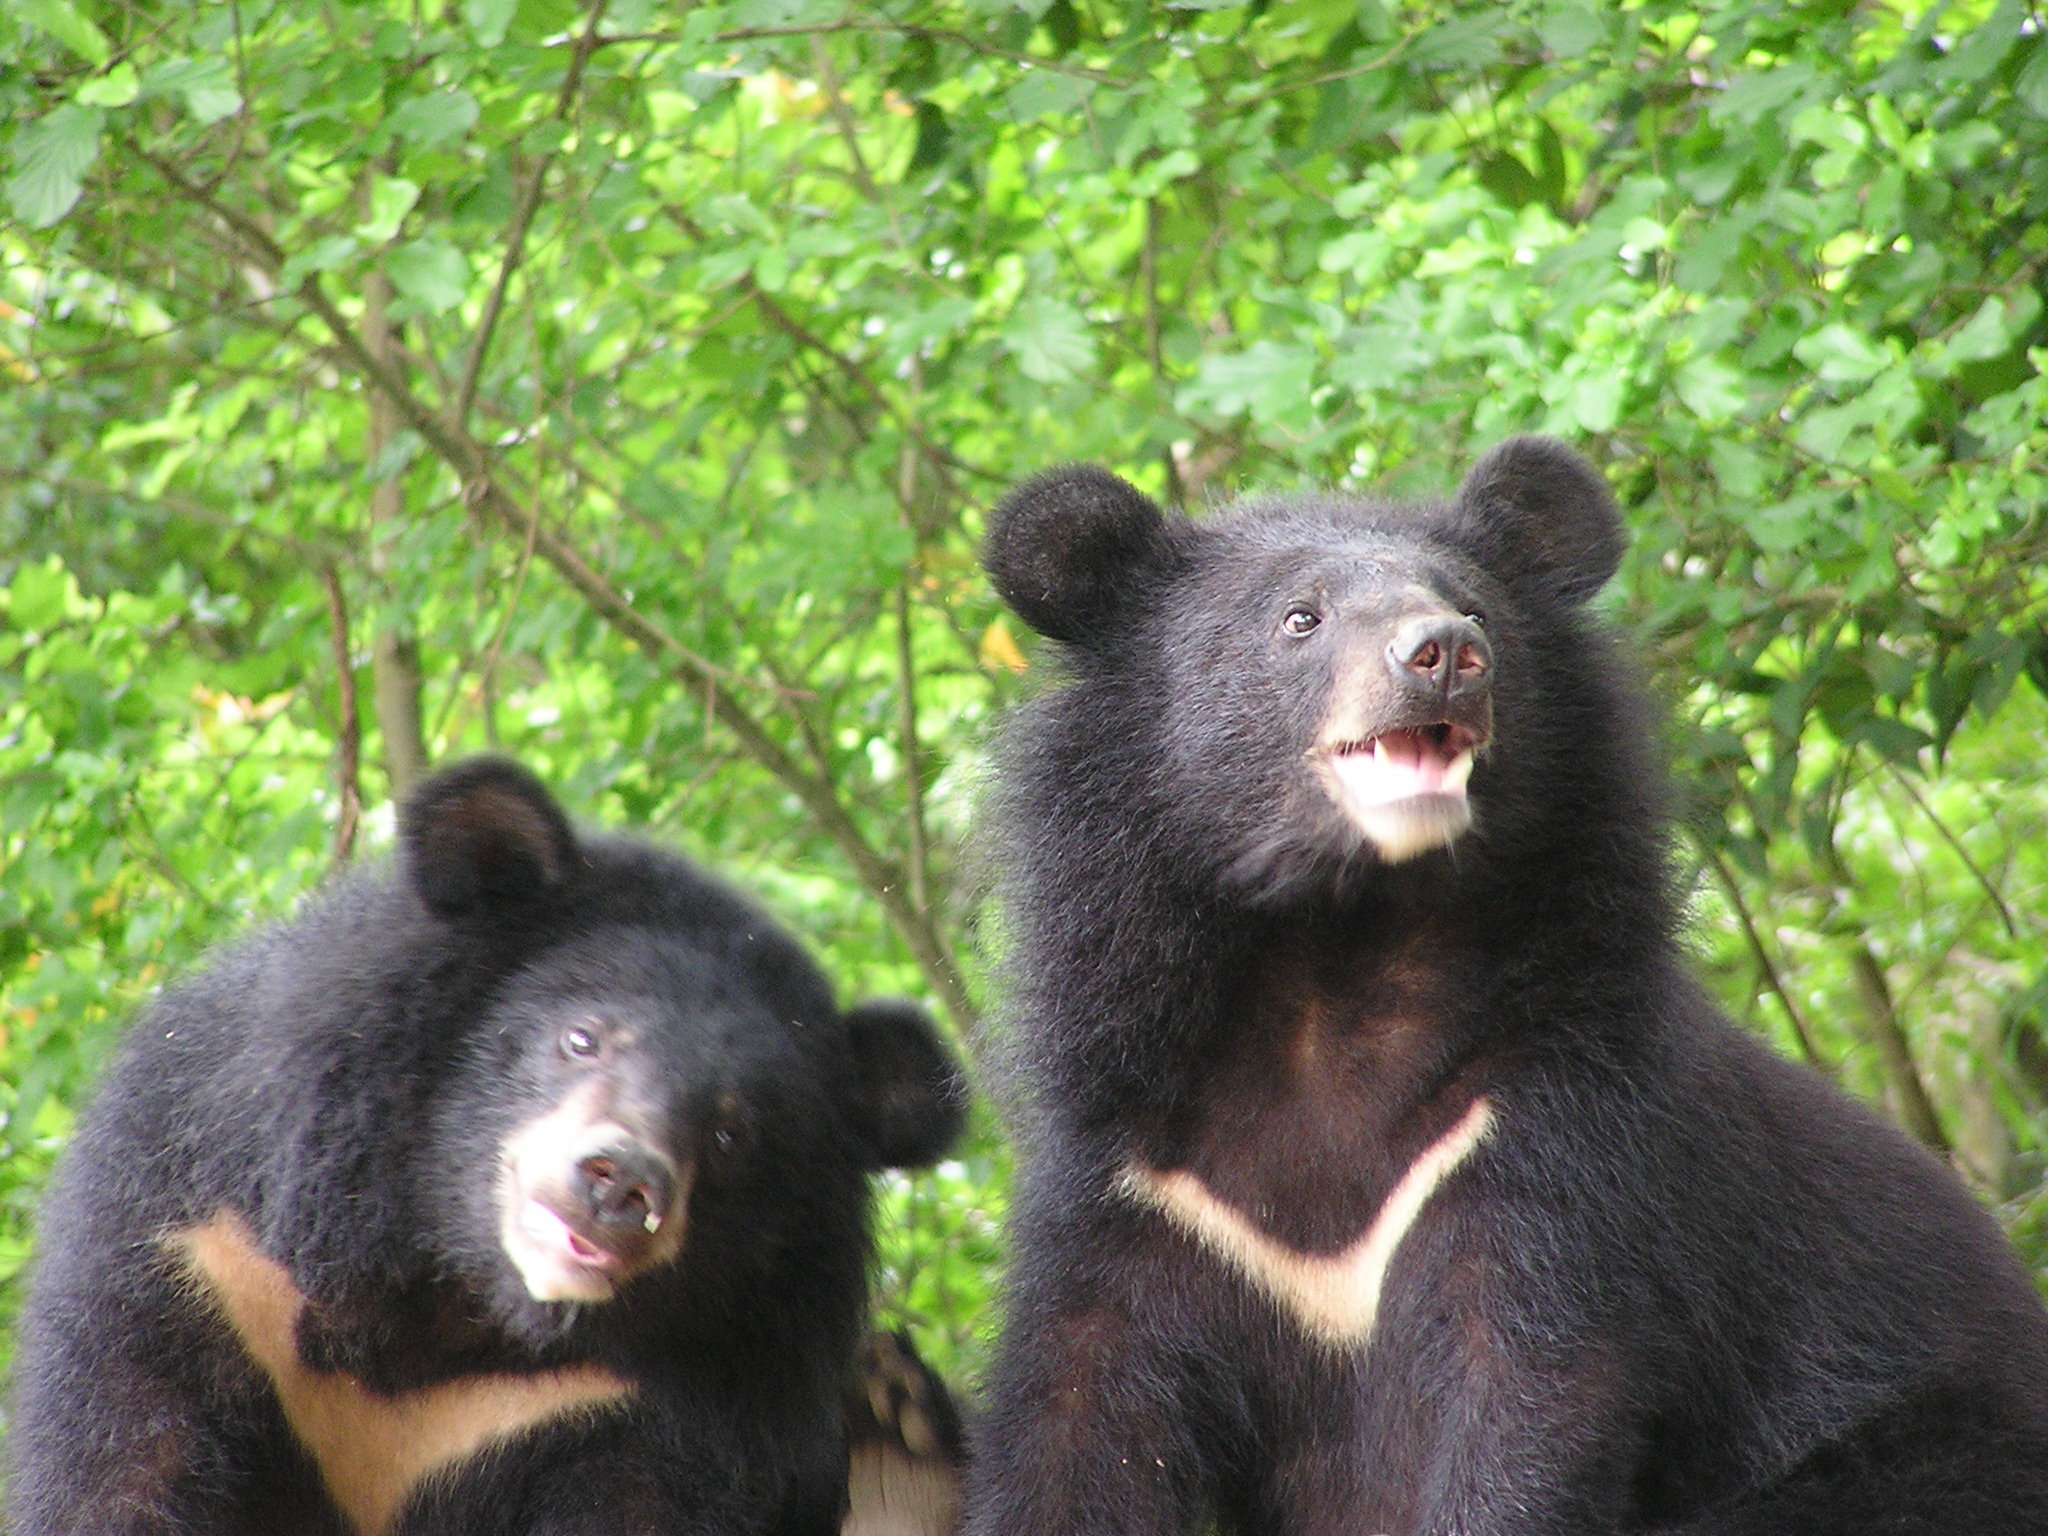 The Formosan black bear was listed as a critically endangered species.In 1994, the Yushan National Park Headquarters established the Formosan Black Bear Conservation Team to conduct research on the Formosan black bear population in the wild.